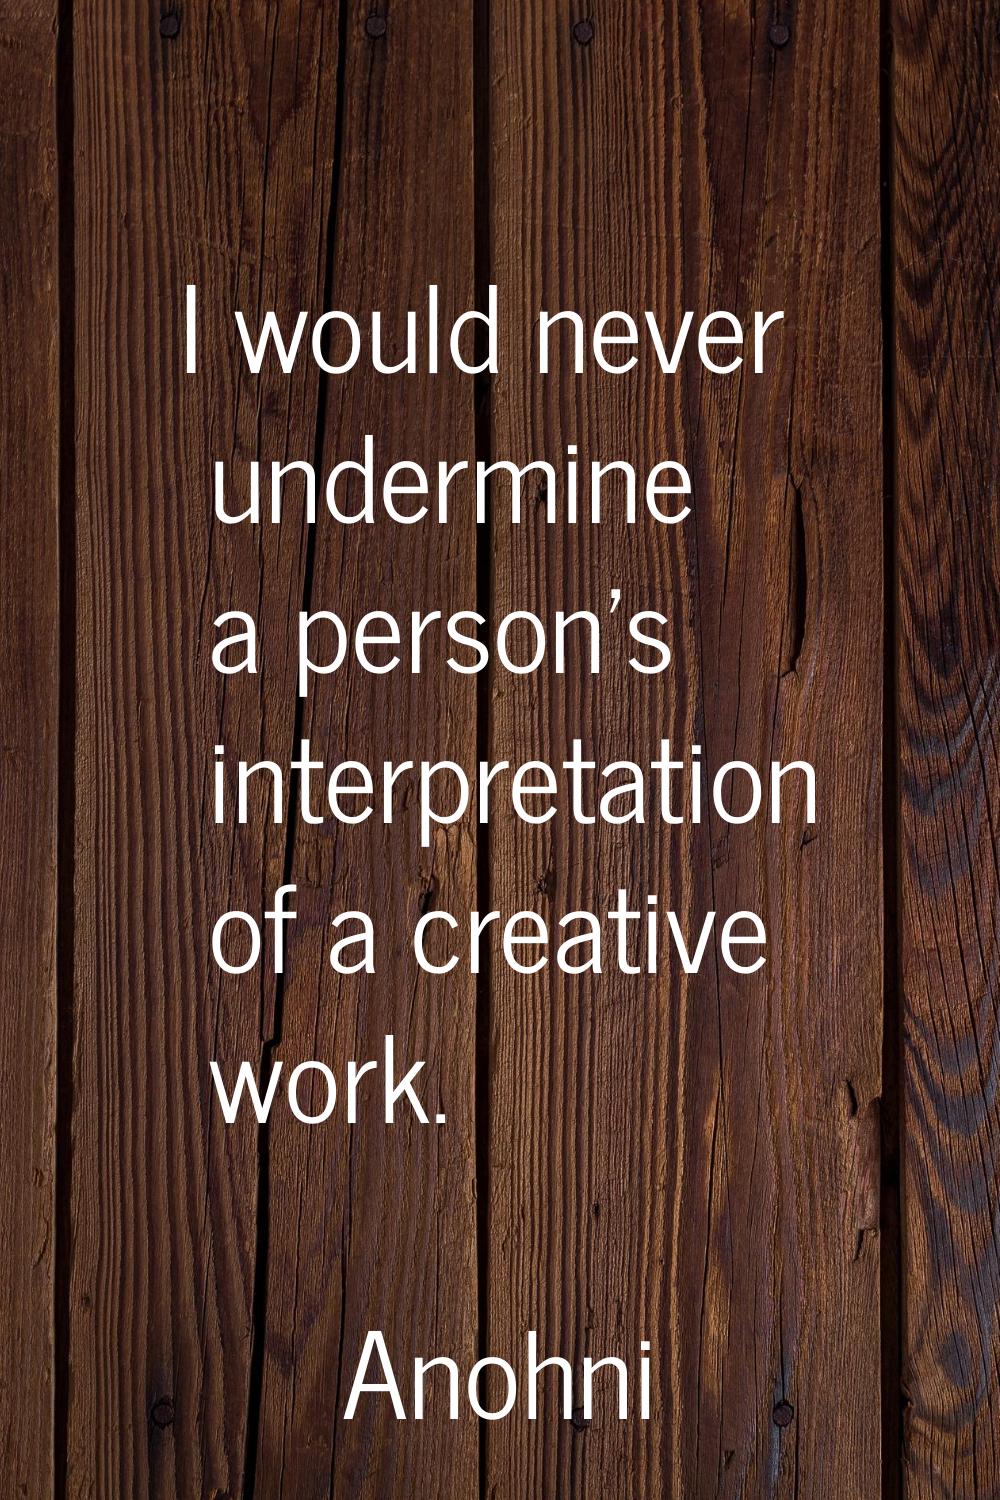 I would never undermine a person's interpretation of a creative work.